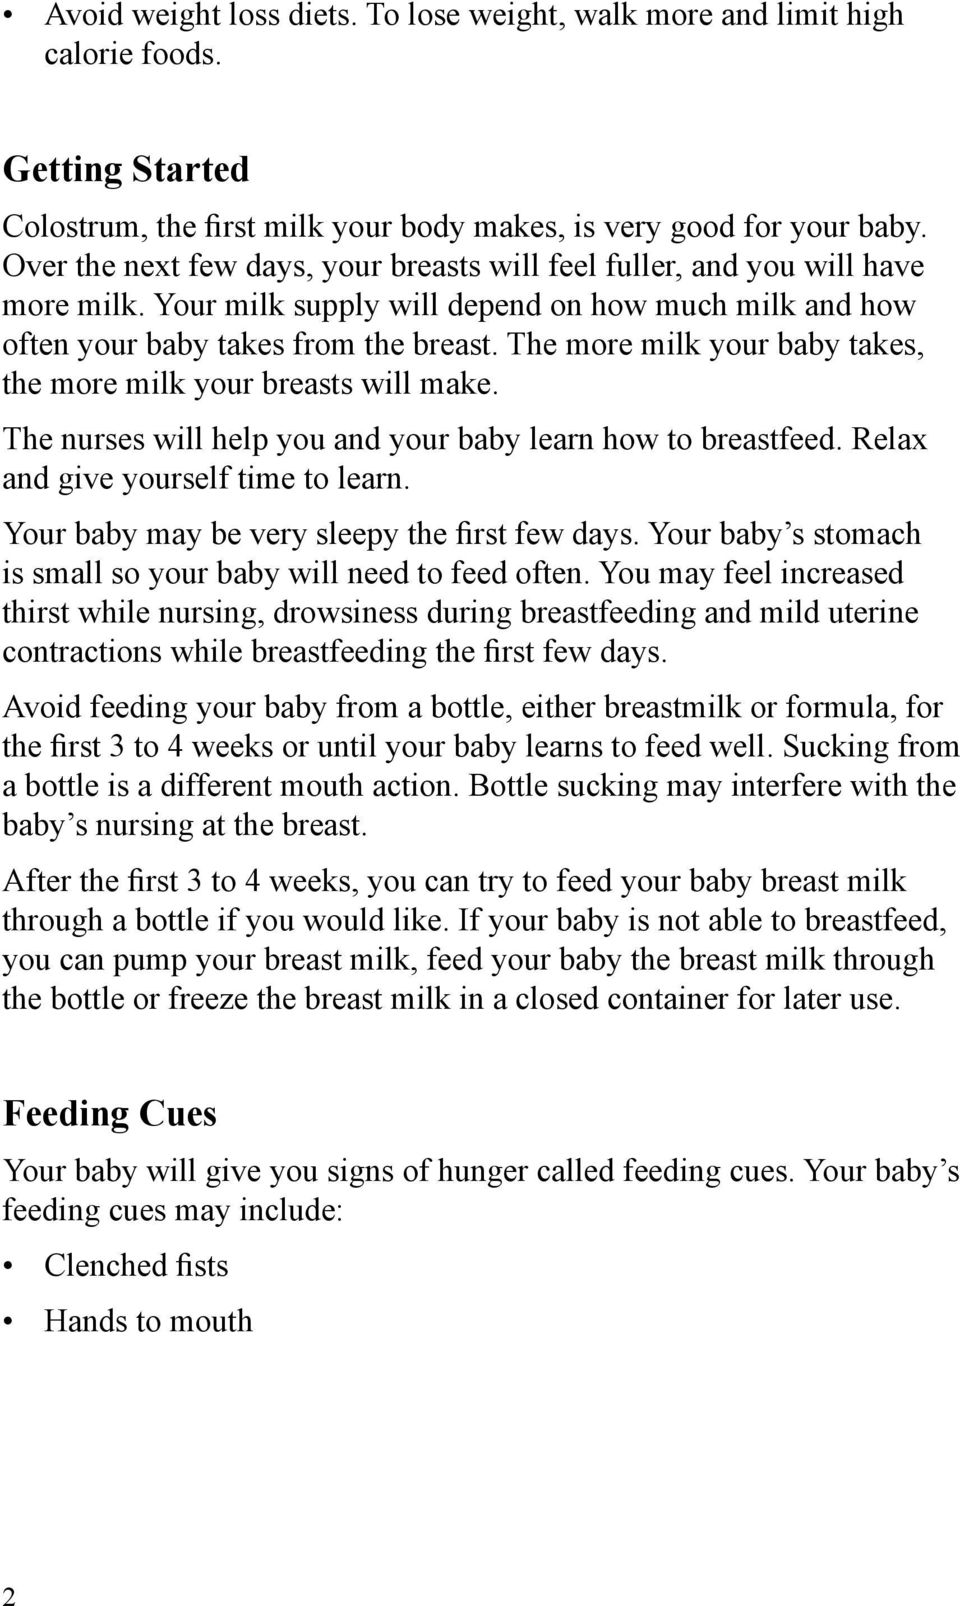 The more milk your baby takes, the more milk your breasts will make. The nurses will help you and your baby learn how to breastfeed. Relax and give yourself time to learn.